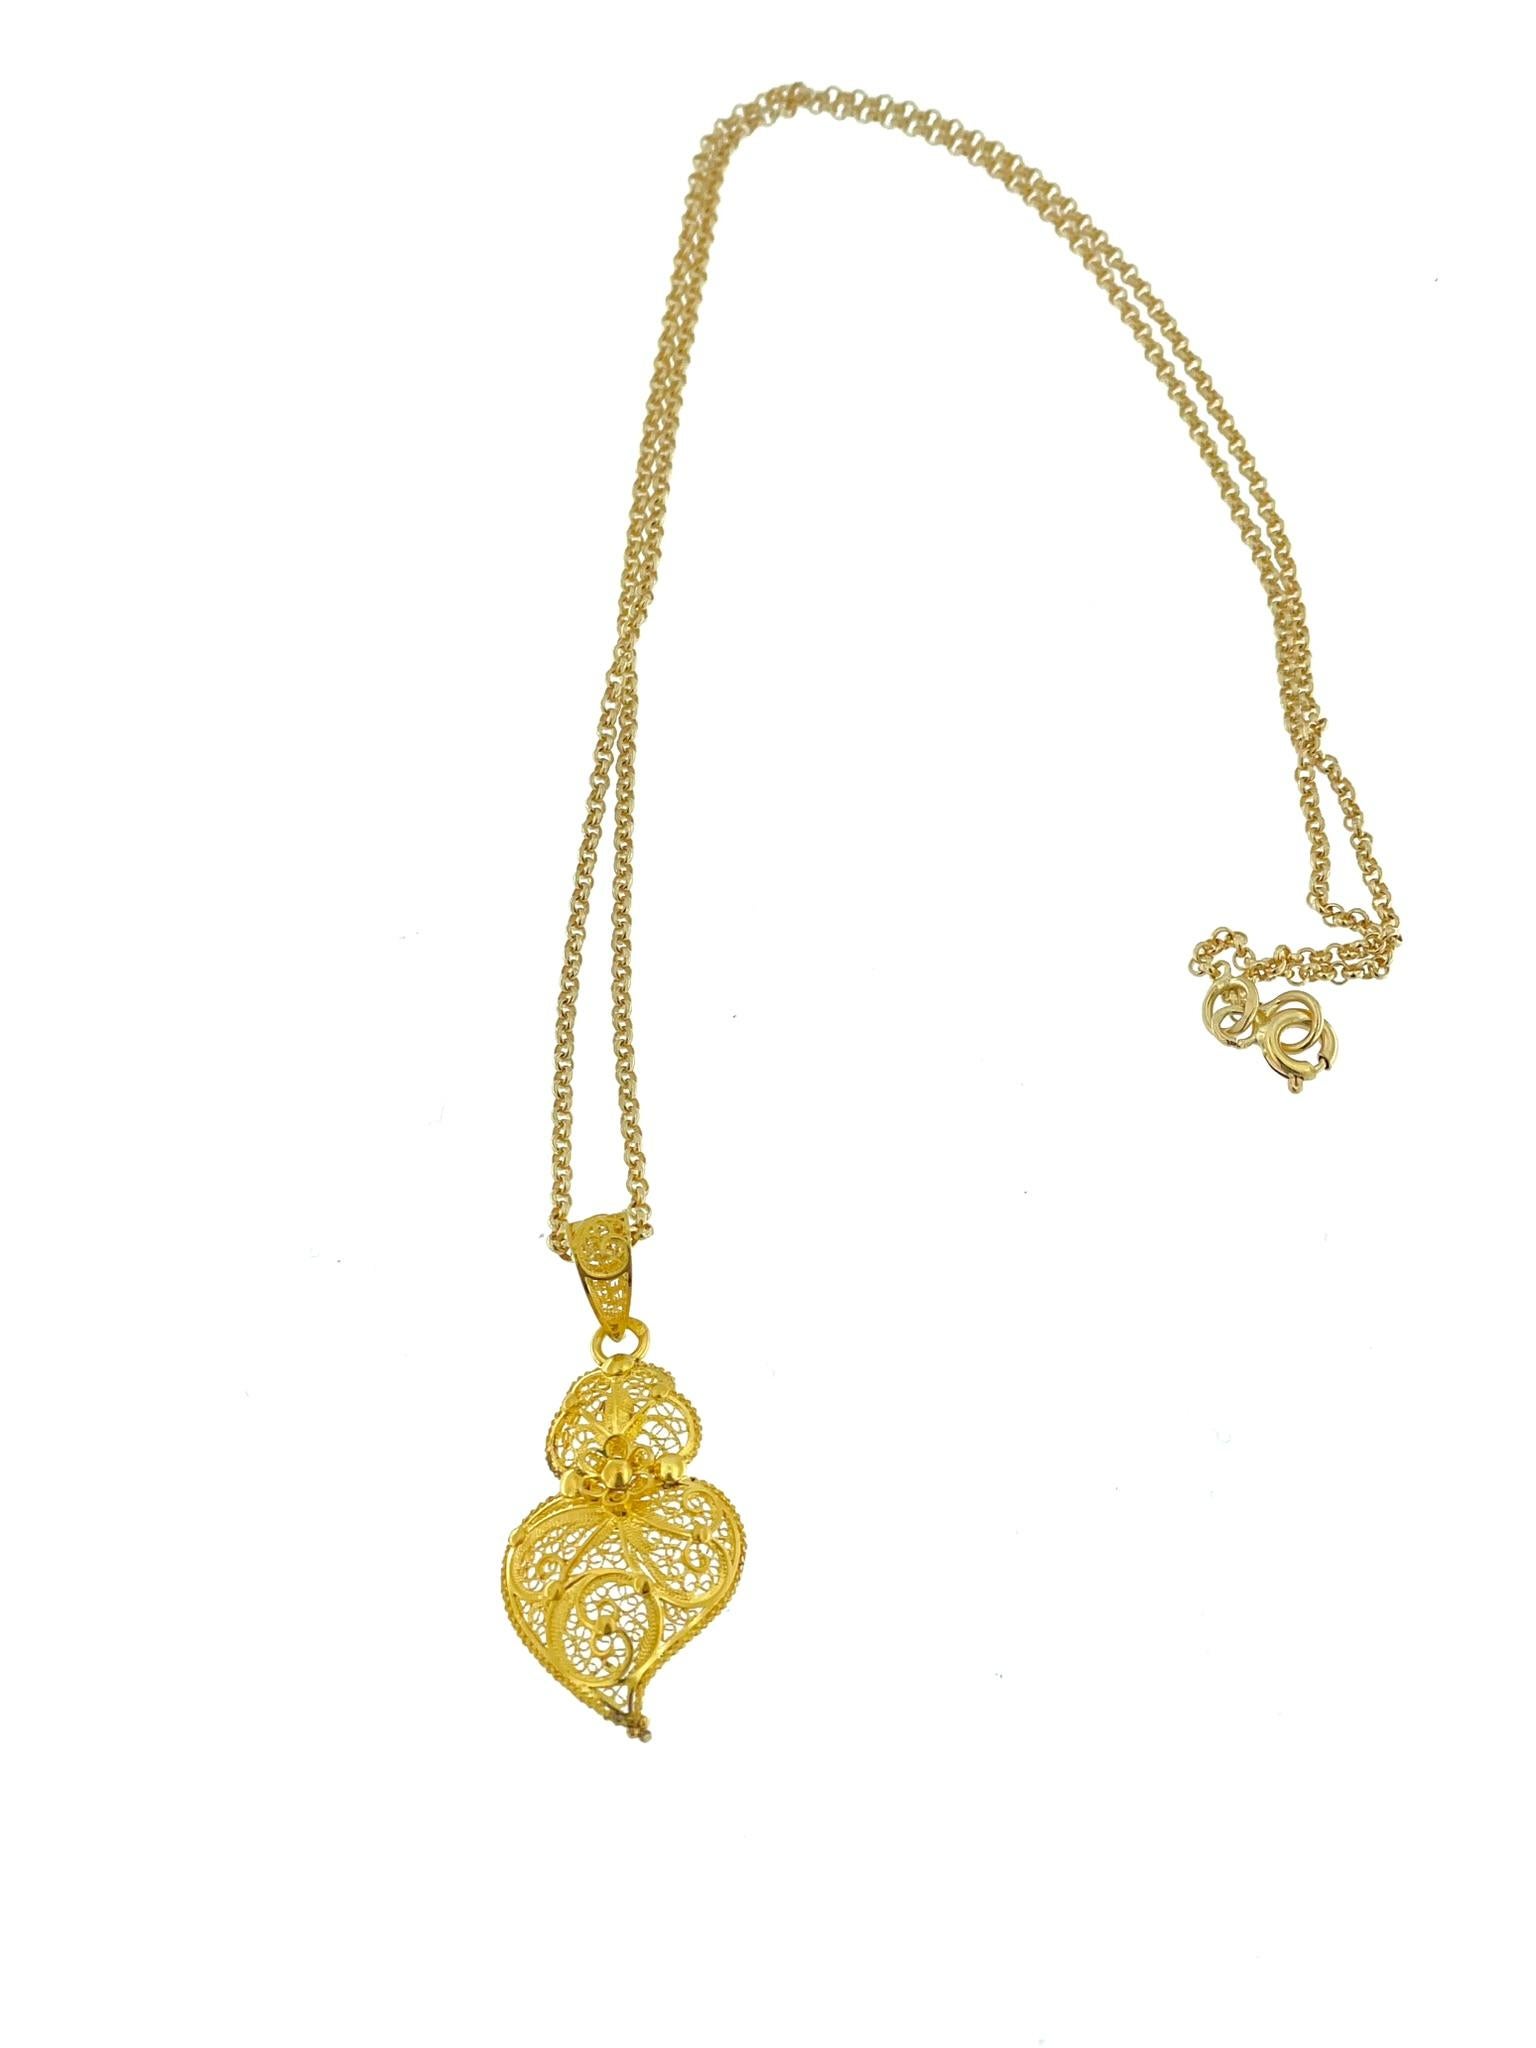 Original Portuguese Viana's Heart with Chain Yellow Gold  For Sale 2